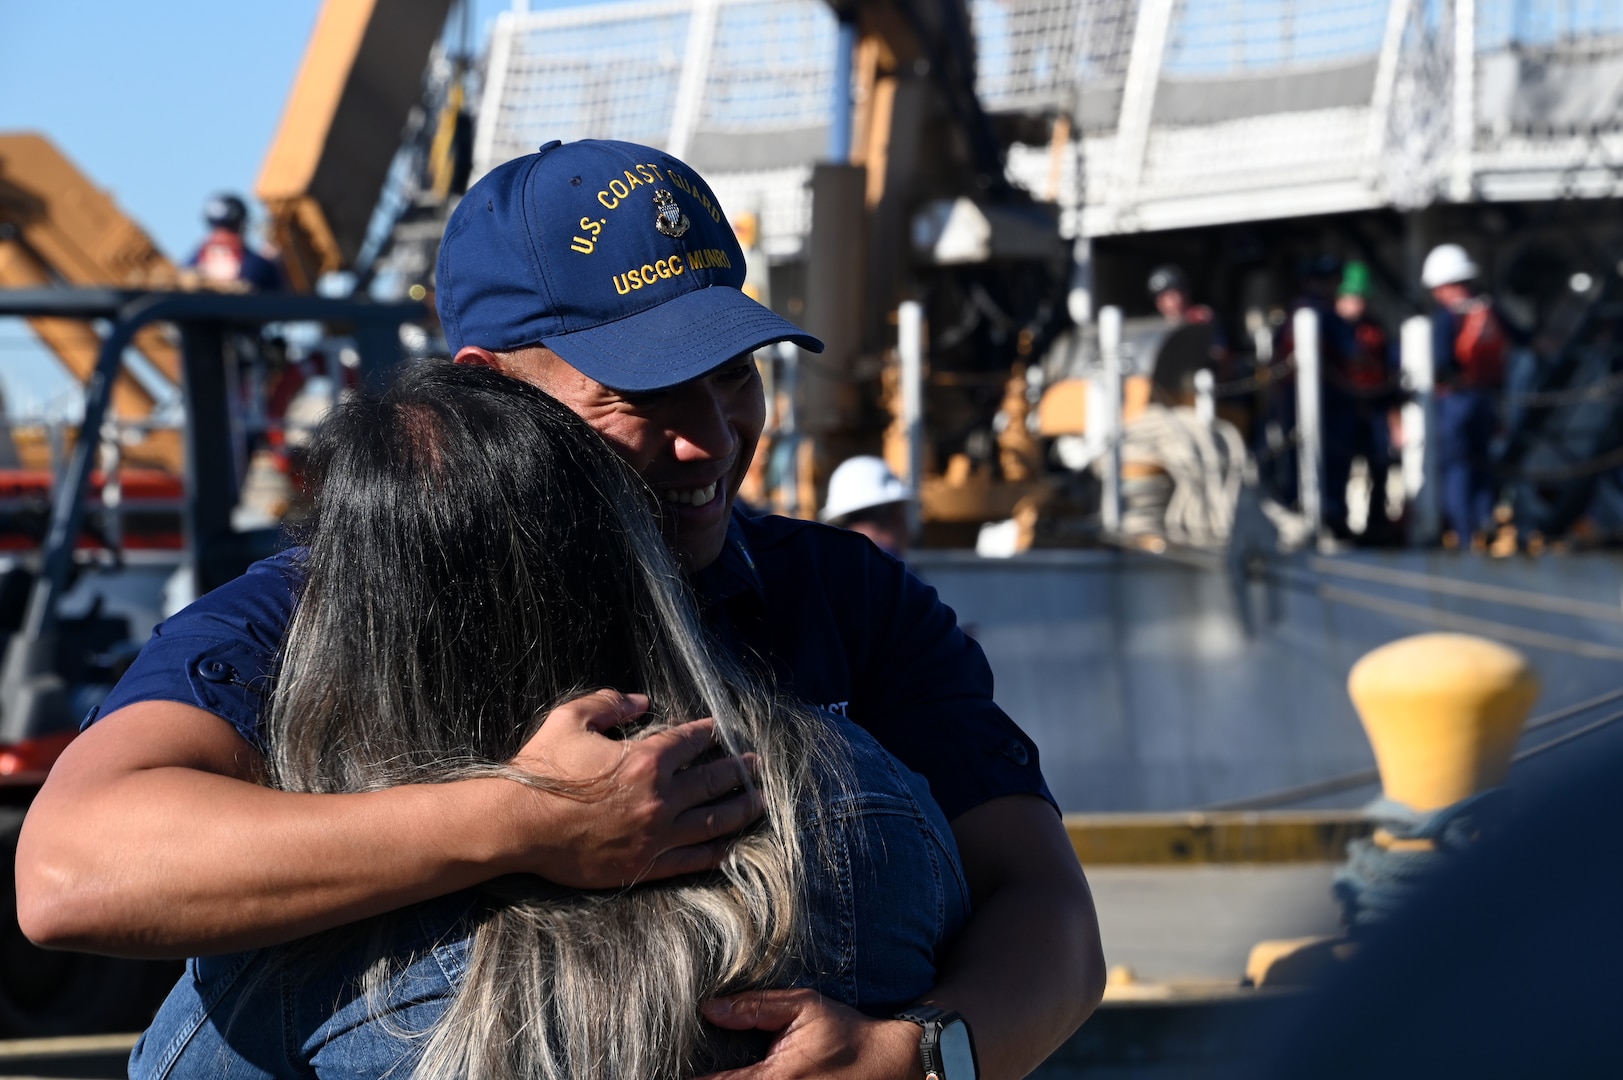 Chief Petty Officer London Venzon, a storekeeper aboard the U.S. Coast Guard Cutter Munro (WSML 755), embraces his loved one on the pier at Base Alameda, California, after Munro returned home from a 118-day Western Pacific deployment, Oct. 18. 2023. Munro's crew conducted a 23,000-mile, multi-month Western Pacific patrol operating in support of the U.S. Navy's Seventh Fleet by conducting multiple engagements with partner nations promoting a free and open Indo-Pacific. U.S. Coast Guard photo by Chief Petty Officer Matthew S. Masaschi.